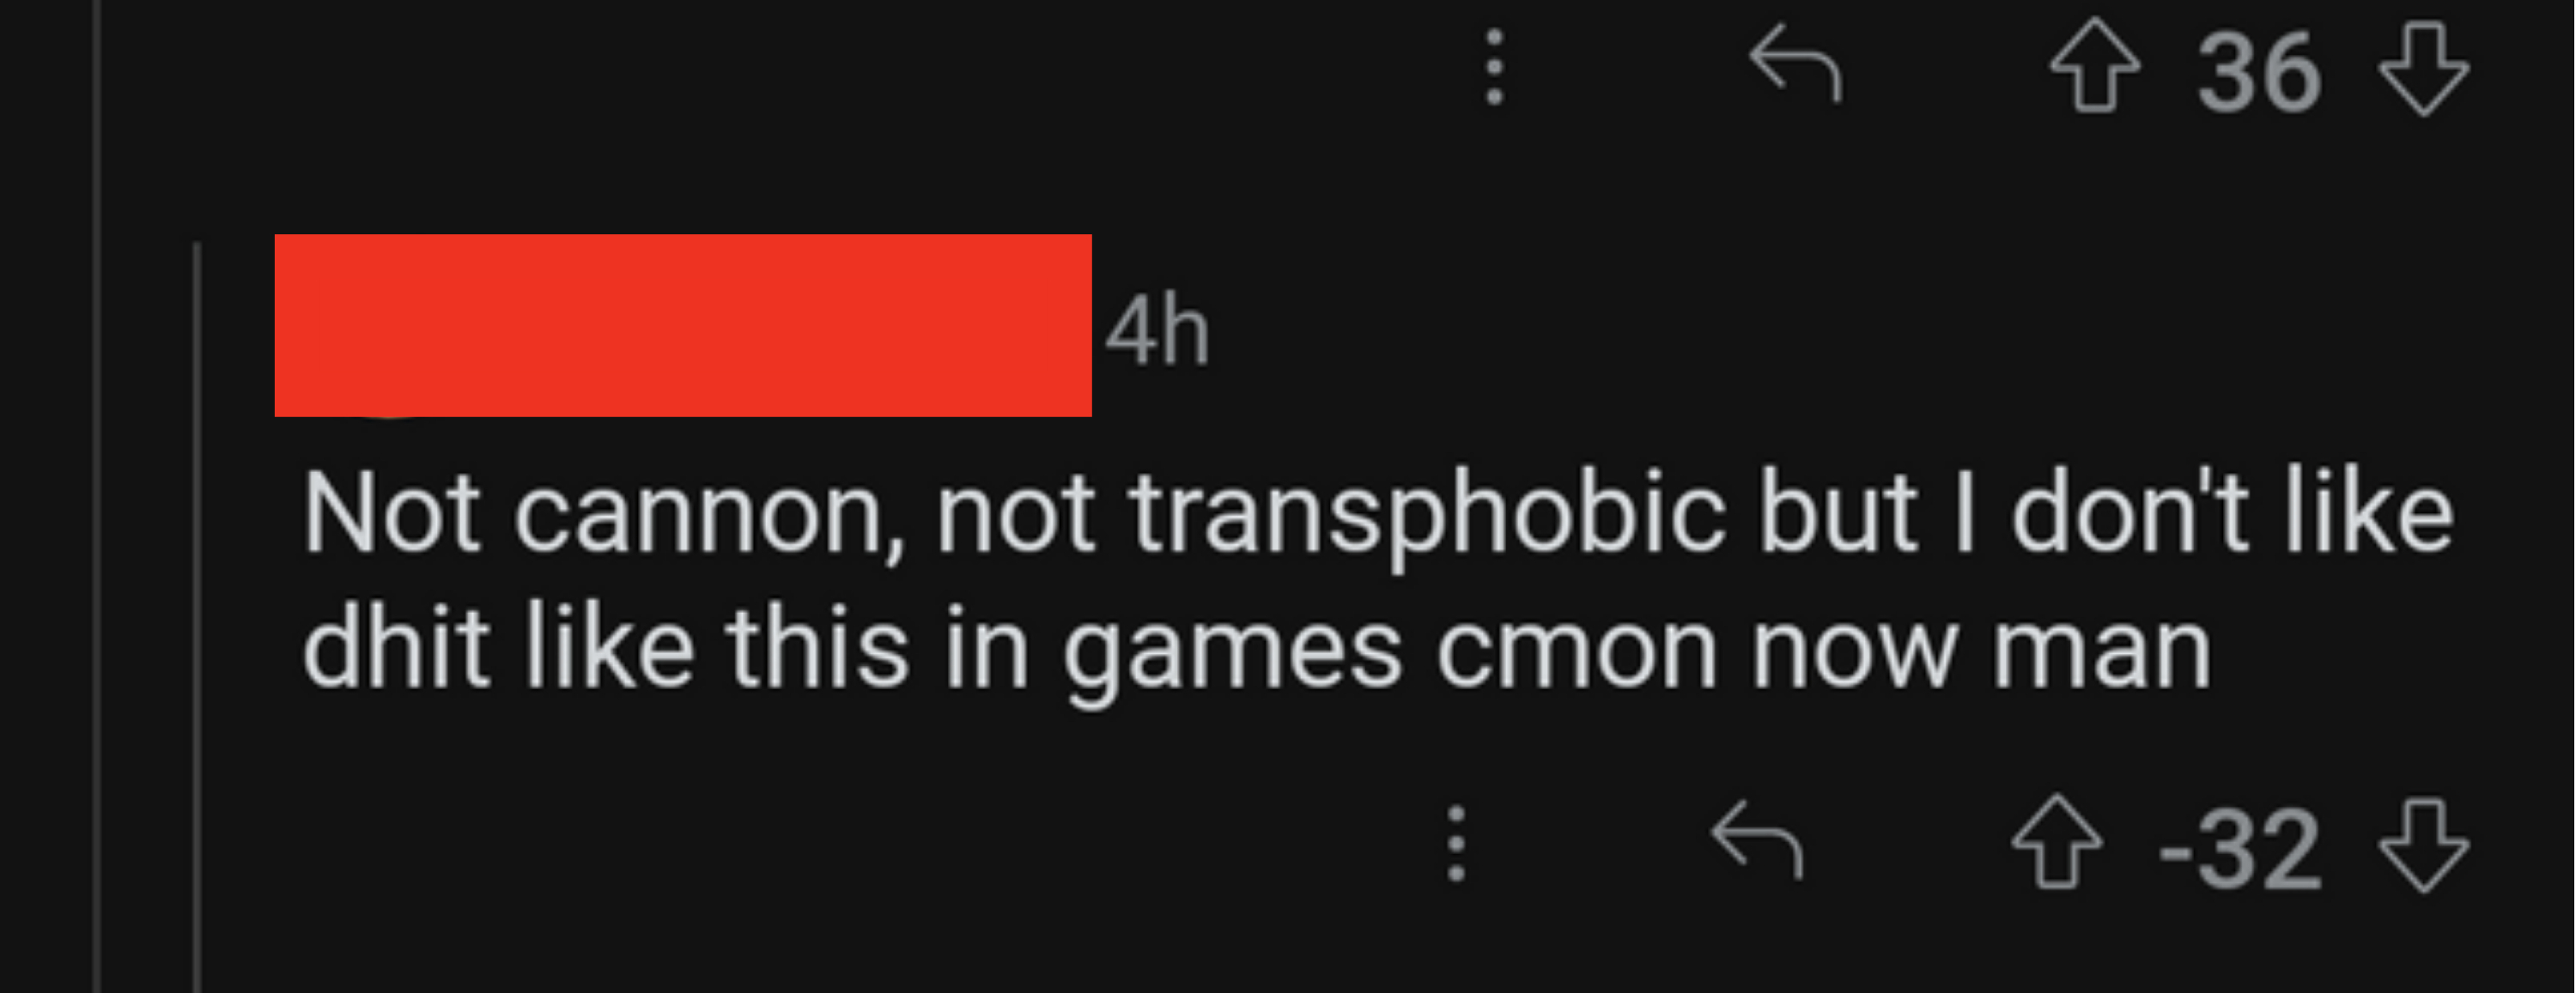 not cannon not transphobic but i don&#x27;t like shit like this in games c&#x27;mon now